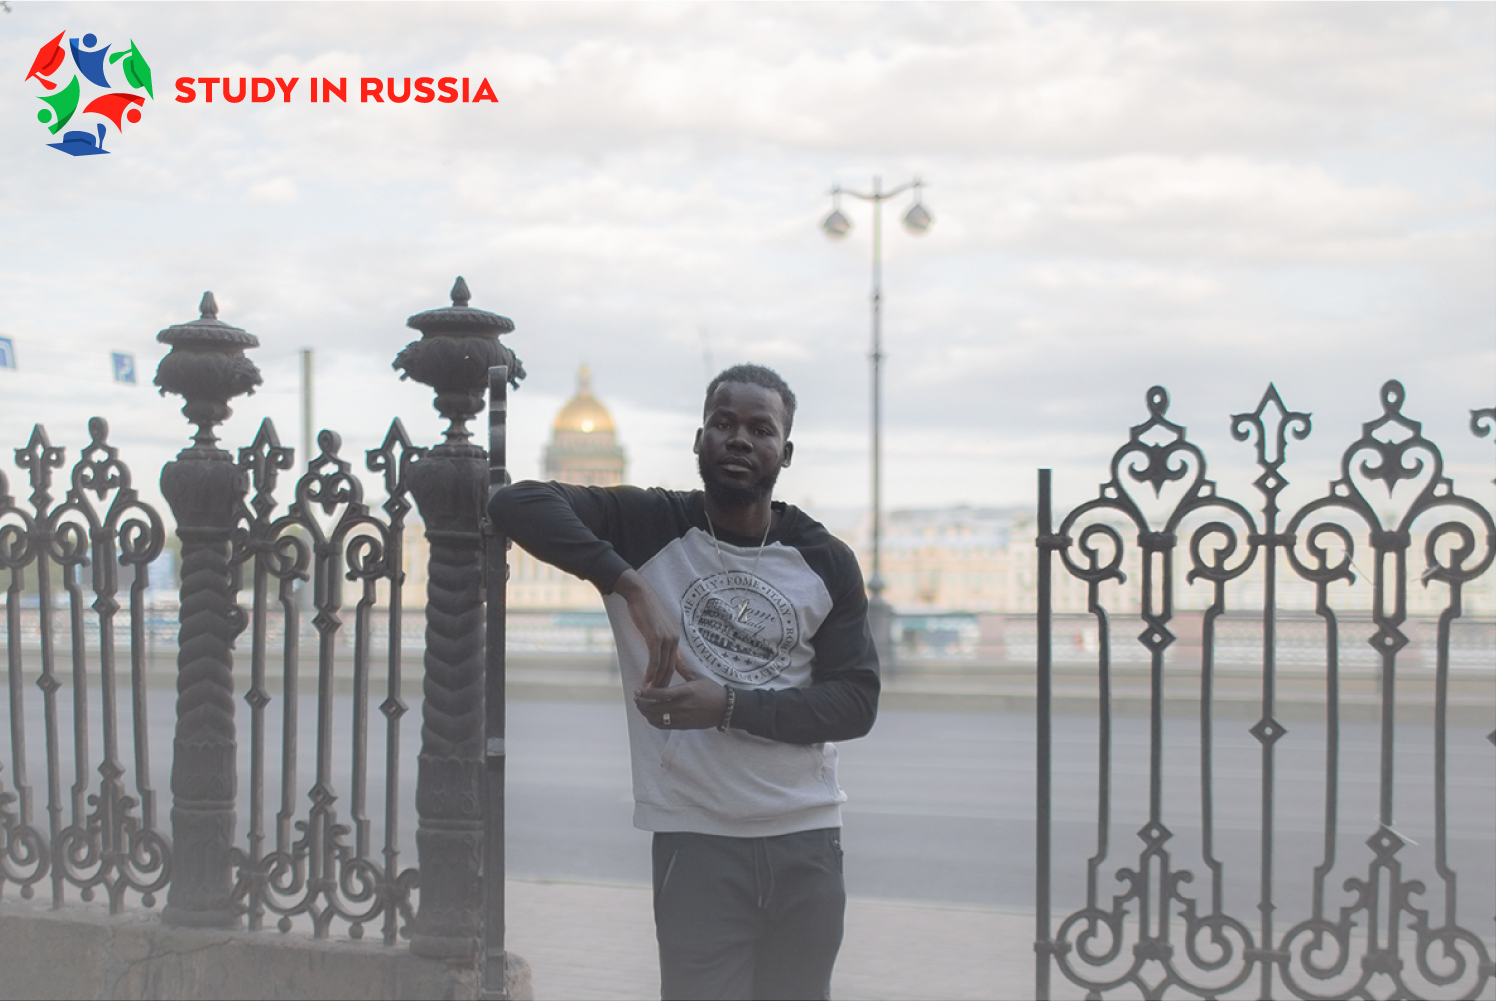 Nabi Ndur from Senegal speaks about Russia and meeting new people in the street